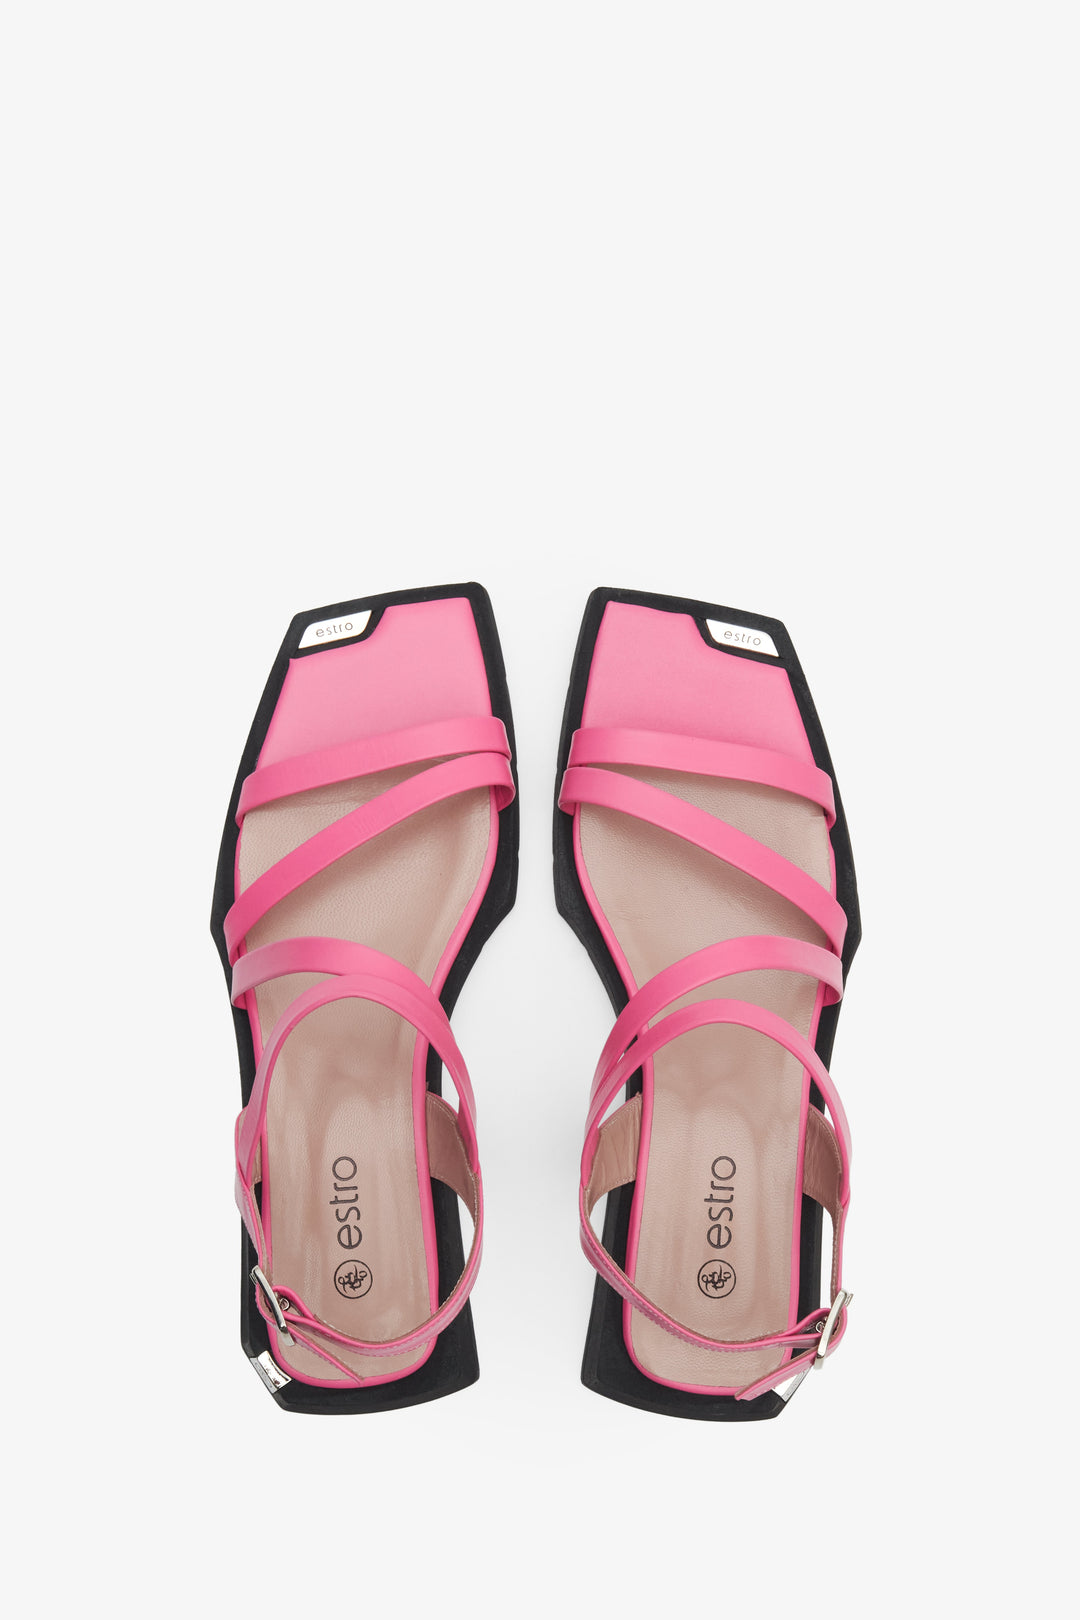 Leather, women's pink summer sandals by Estro - presentation of the footwear from the top.